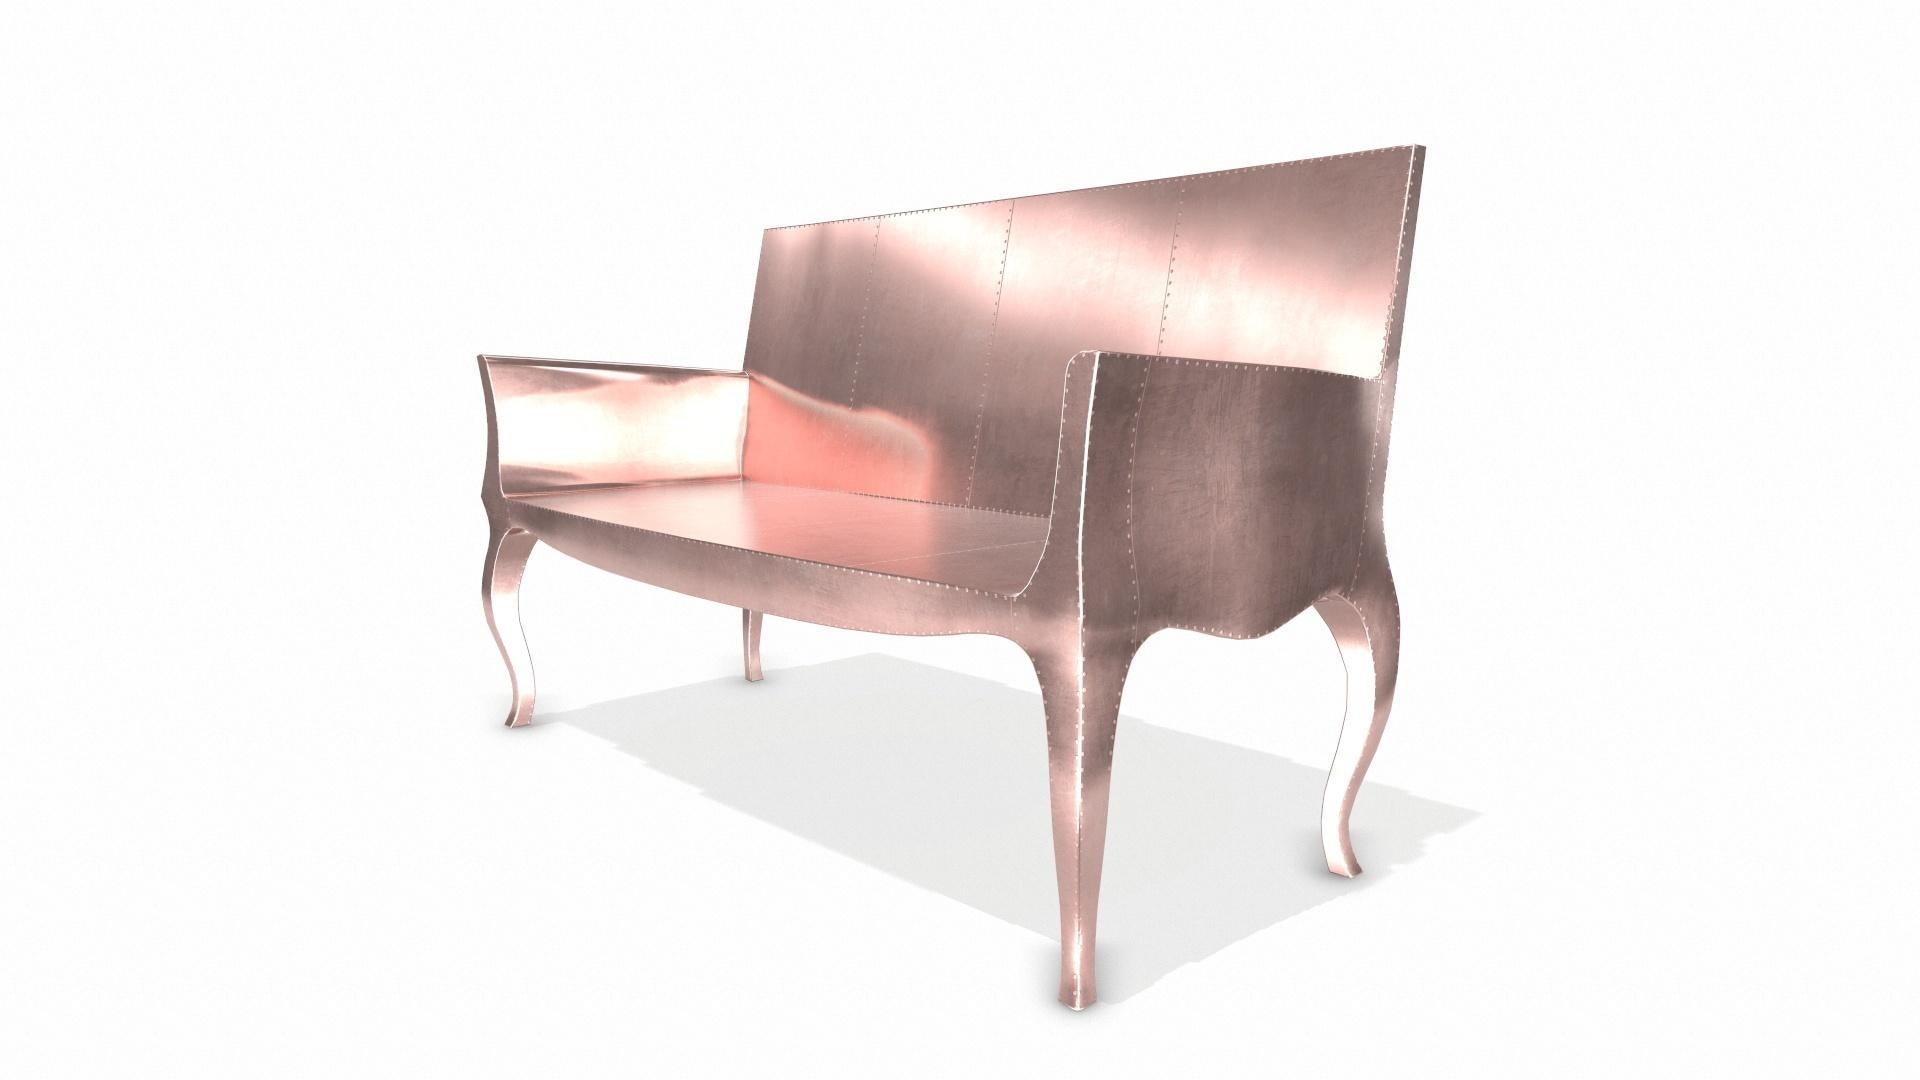 Hand-Crafted Louise Settee Art Deco Chaise Longues in Smooth Copper by Paul Mathieu  For Sale